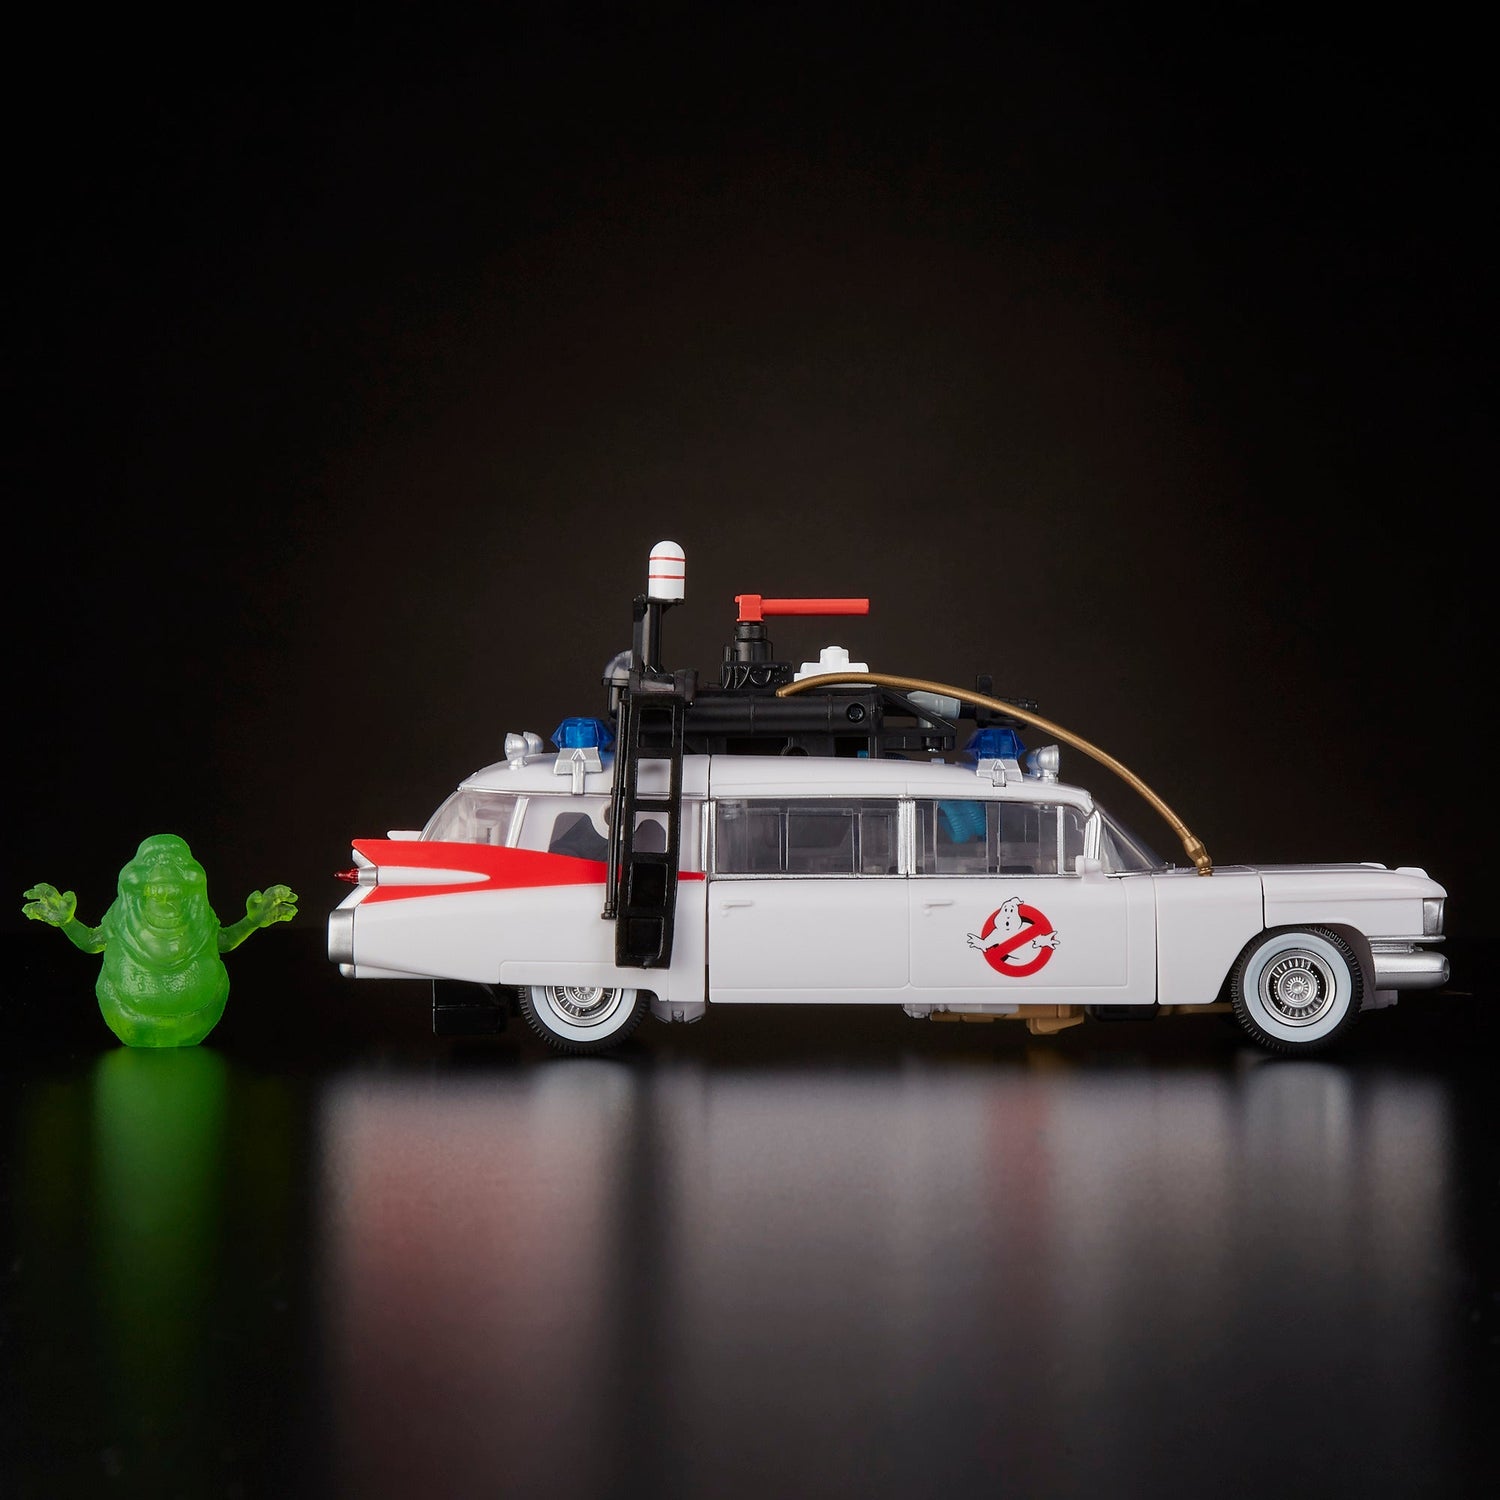 Transformers Generations Collaborative: Ghostbusters Mash-Up Ecto-1 Ectotron Action Figure